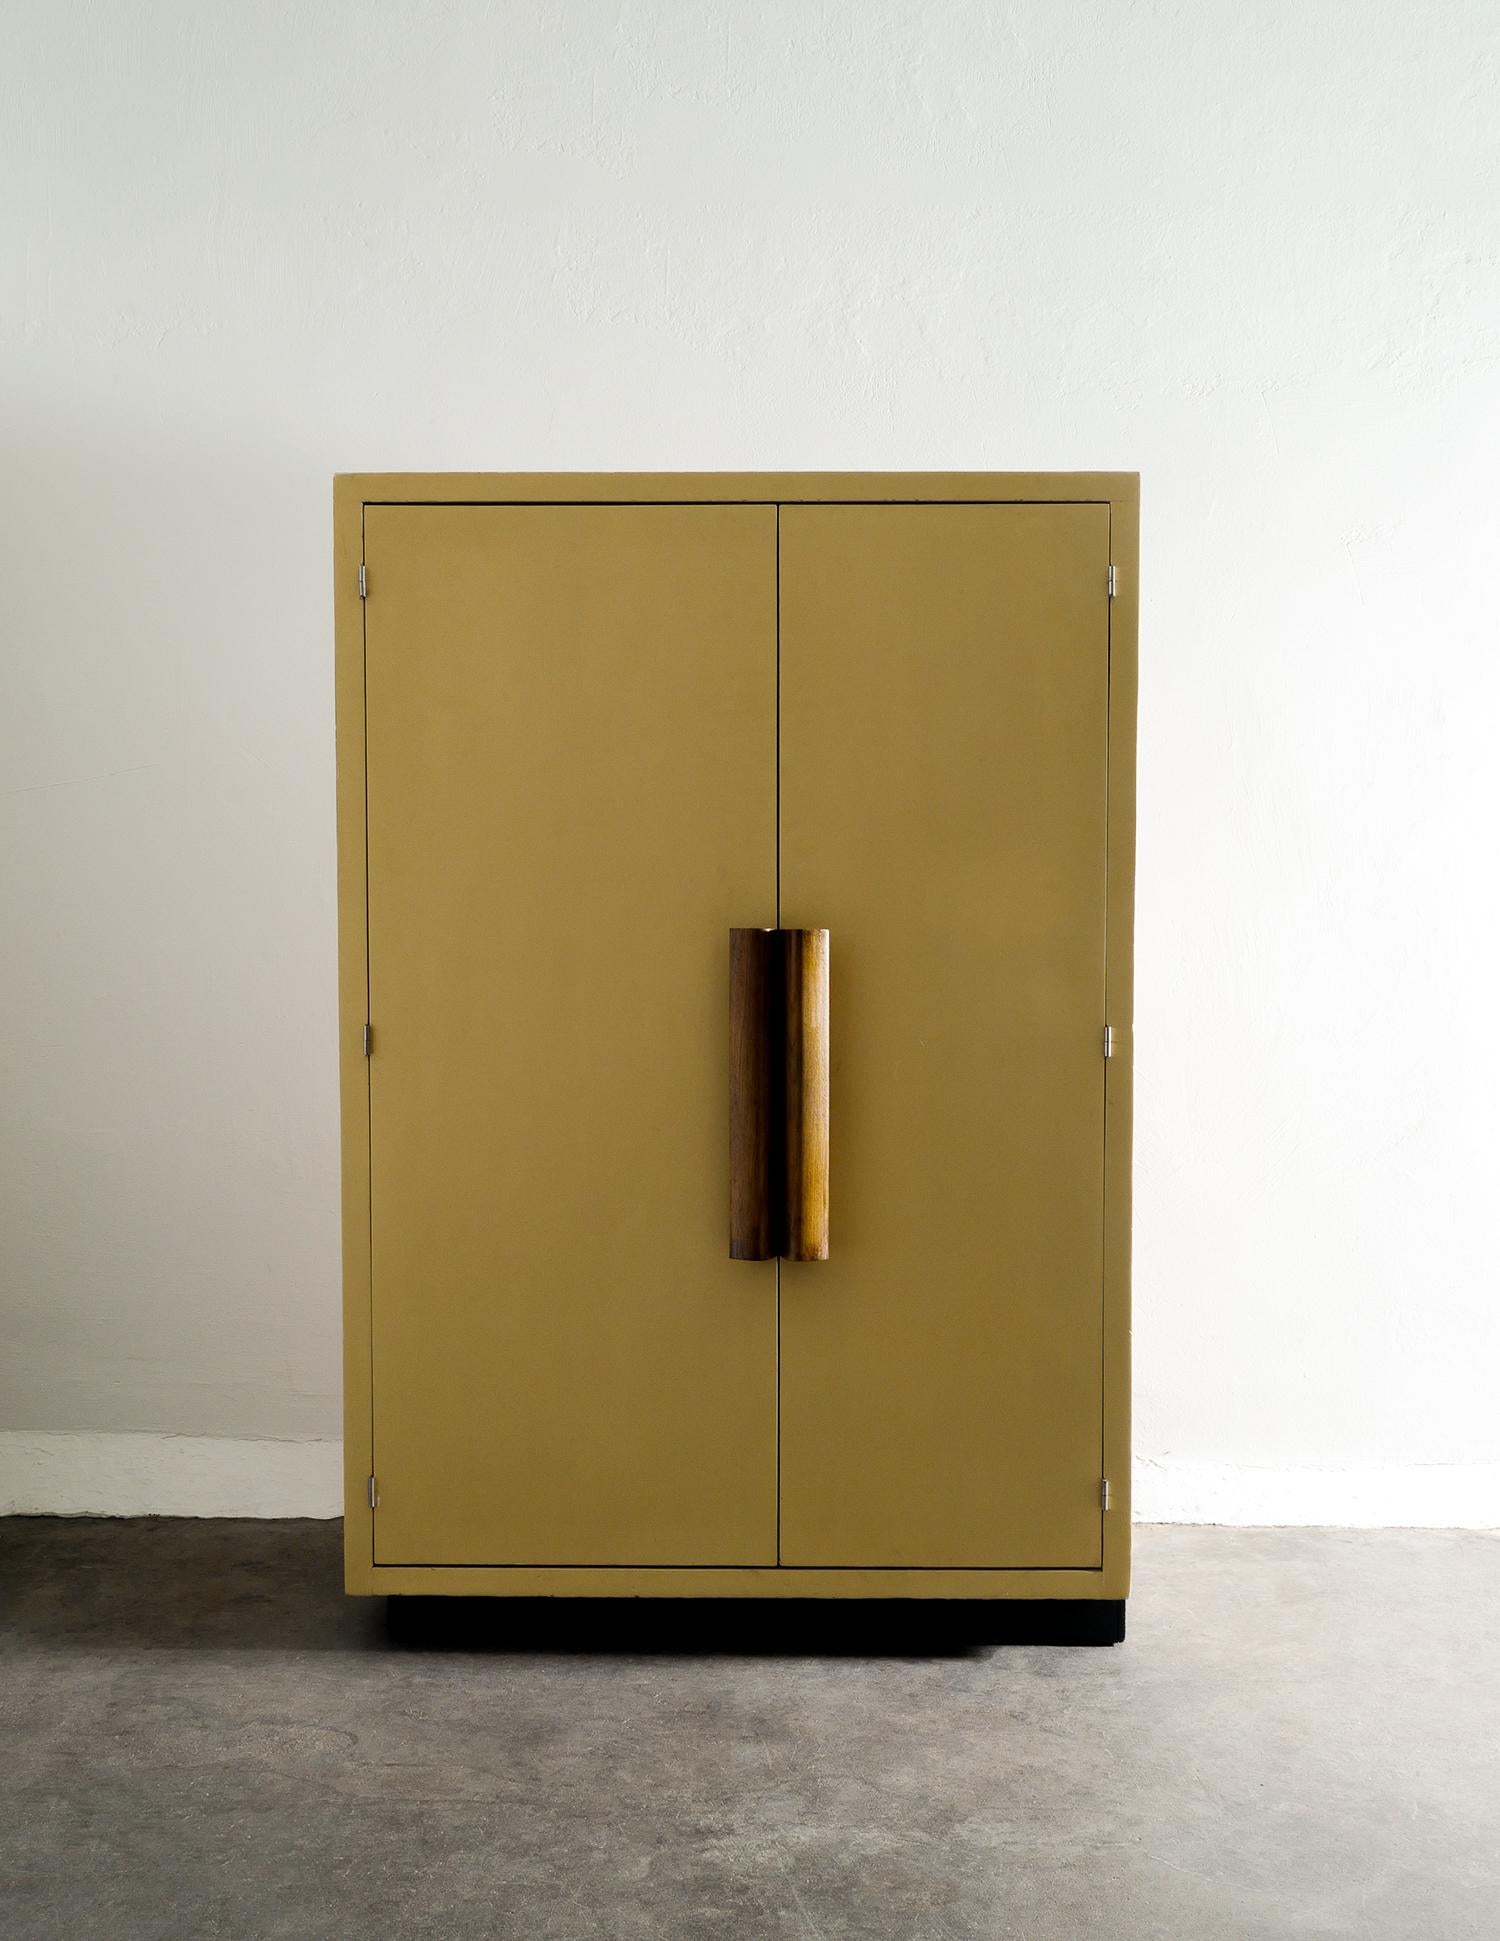 Very rare and iconic midcentury wardrobe / dresser / closet designed by Le Corbusier for apartments of the Cité radieuse housing unit in Marseille 1949. In very nice and charmy condition with the lacquered wood and stained oak handles. Doors are in